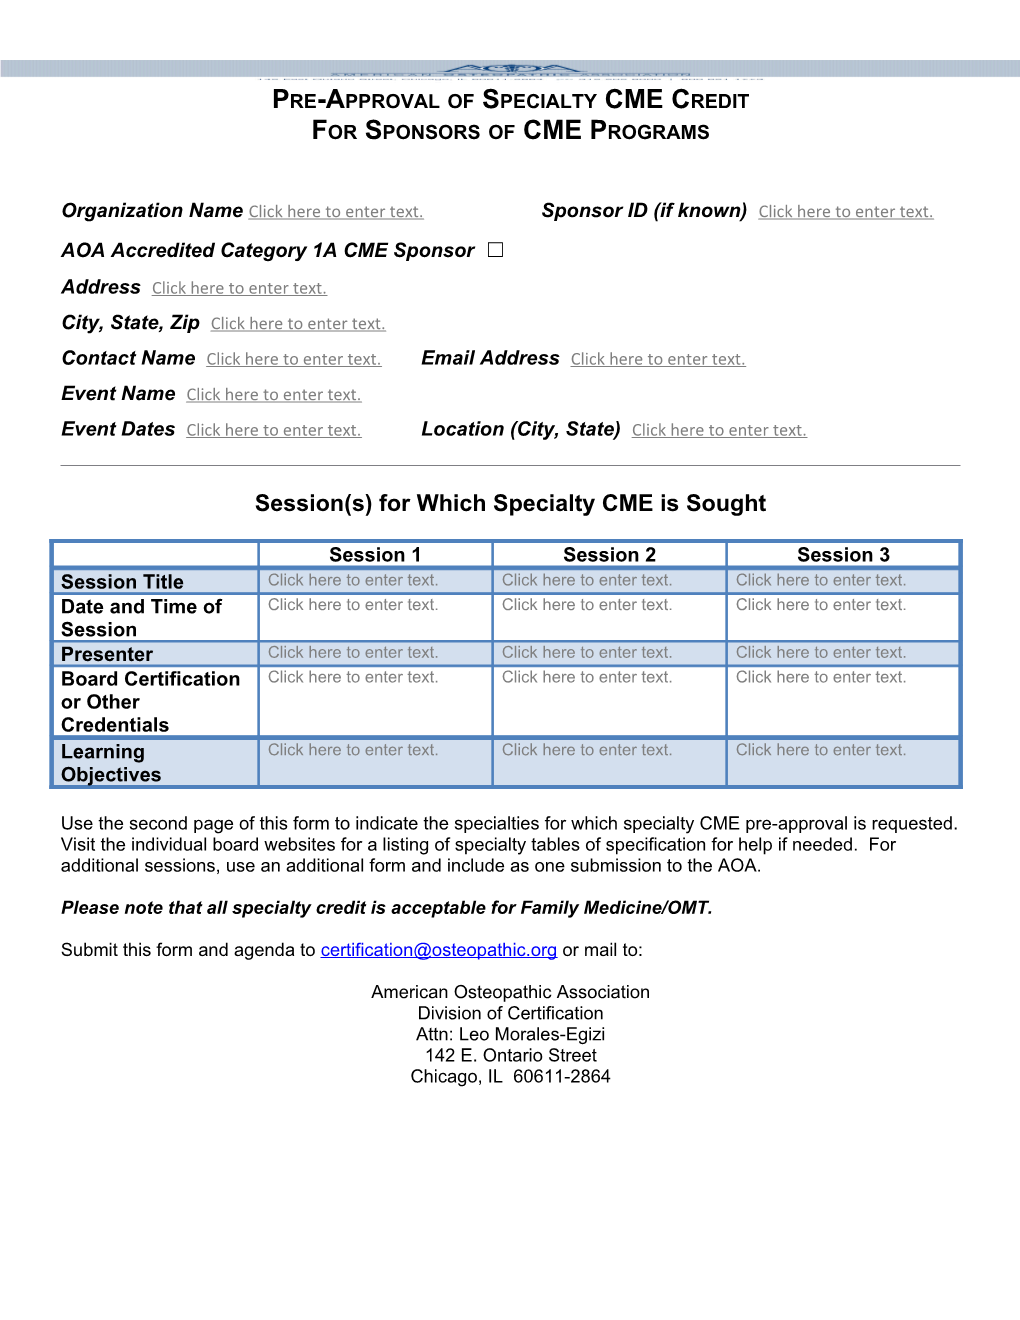 Pre-Approval of Specialty CME Credit